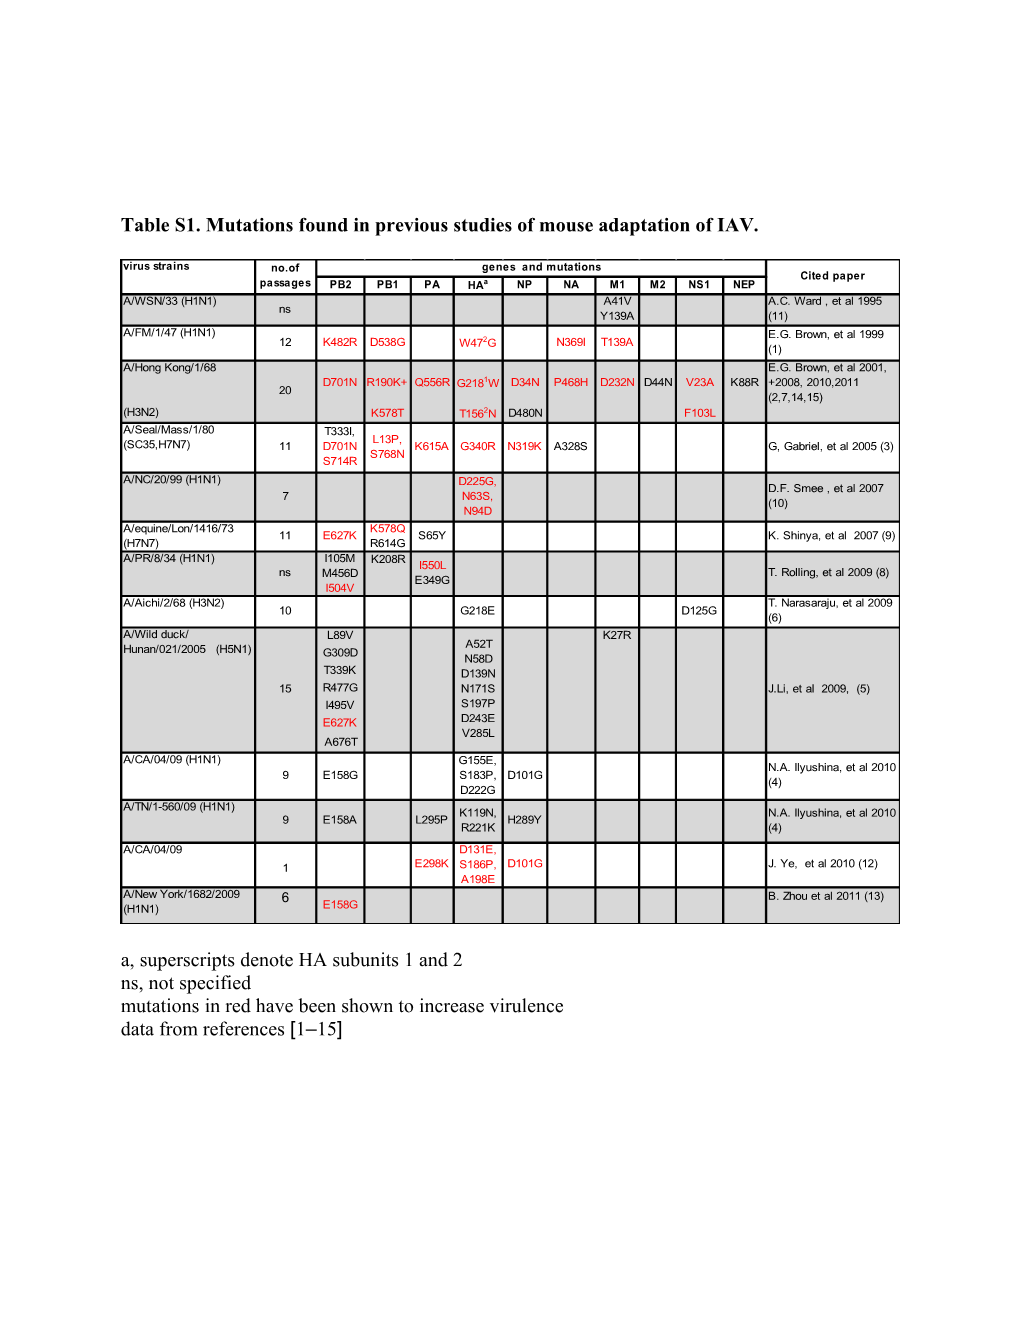 Table S1. Mutations Found in Previous Studies of Mouse Adaptation of IAV